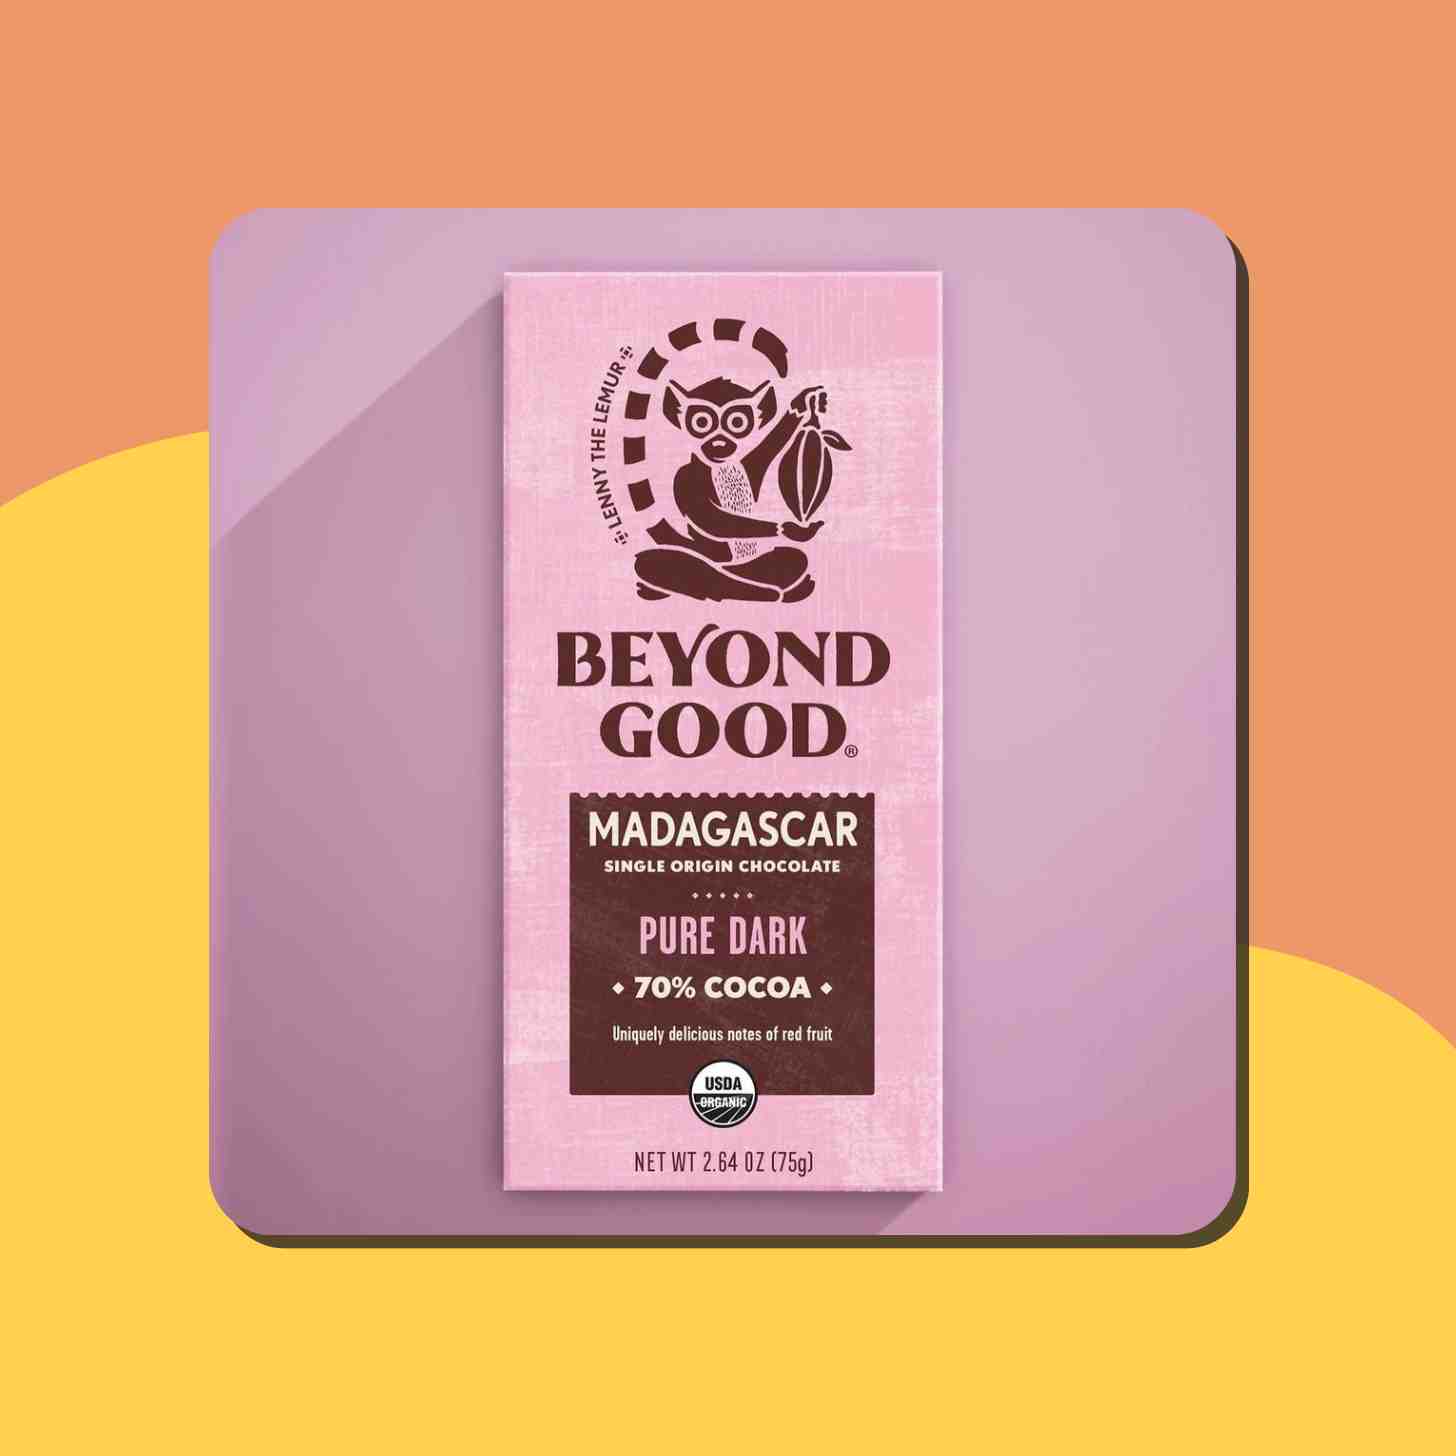 A Box Of Beyond Good Pure Dark 70% Cocoa. Featuring Lenny The Lemur At The Top